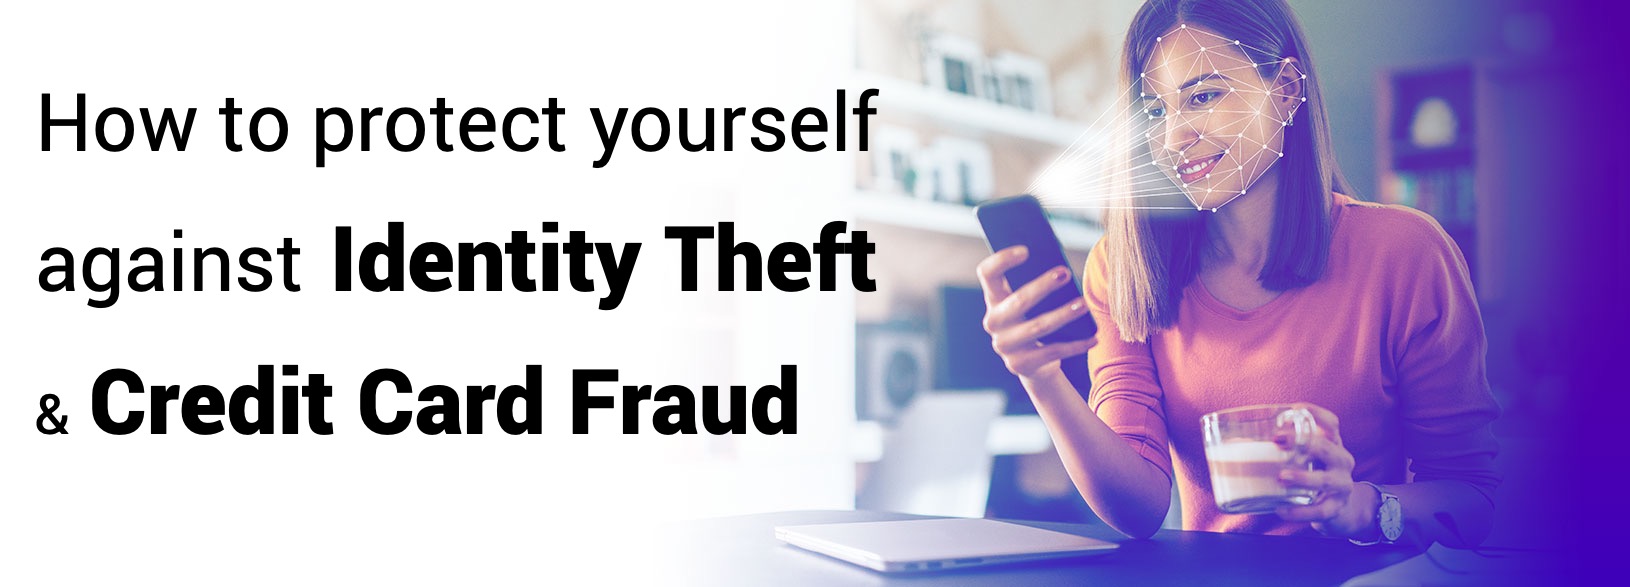 Protect yourself against Identity Theft & Credit Card Fraud